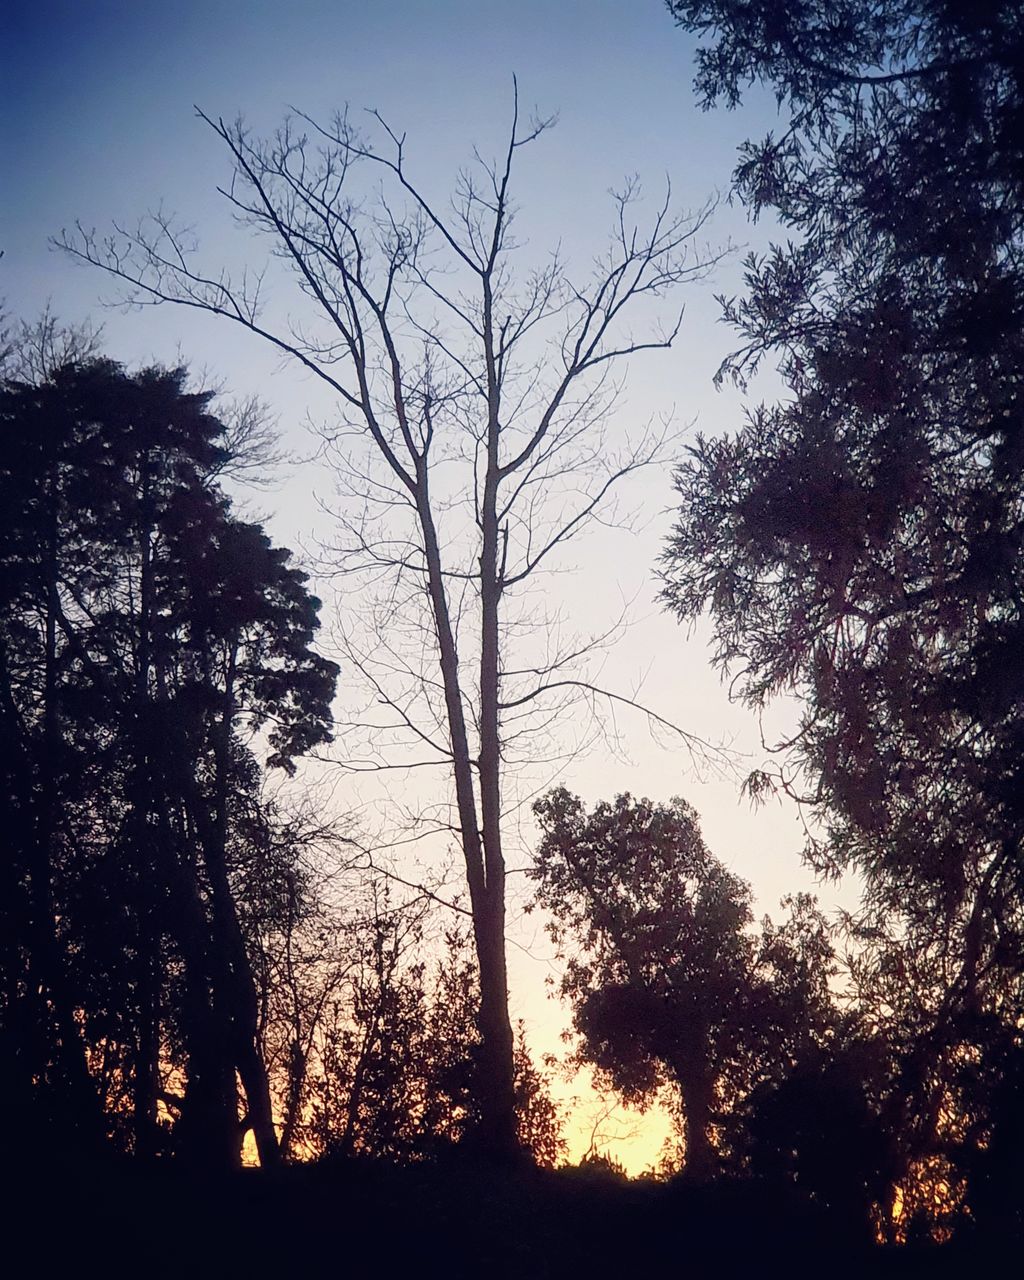 tree, plant, nature, sky, silhouette, morning, beauty in nature, no people, tranquility, branch, sunlight, scenics - nature, tranquil scene, darkness, land, growth, outdoors, forest, dawn, environment, cloud, non-urban scene, low angle view, landscape, tree trunk, trunk, leaf